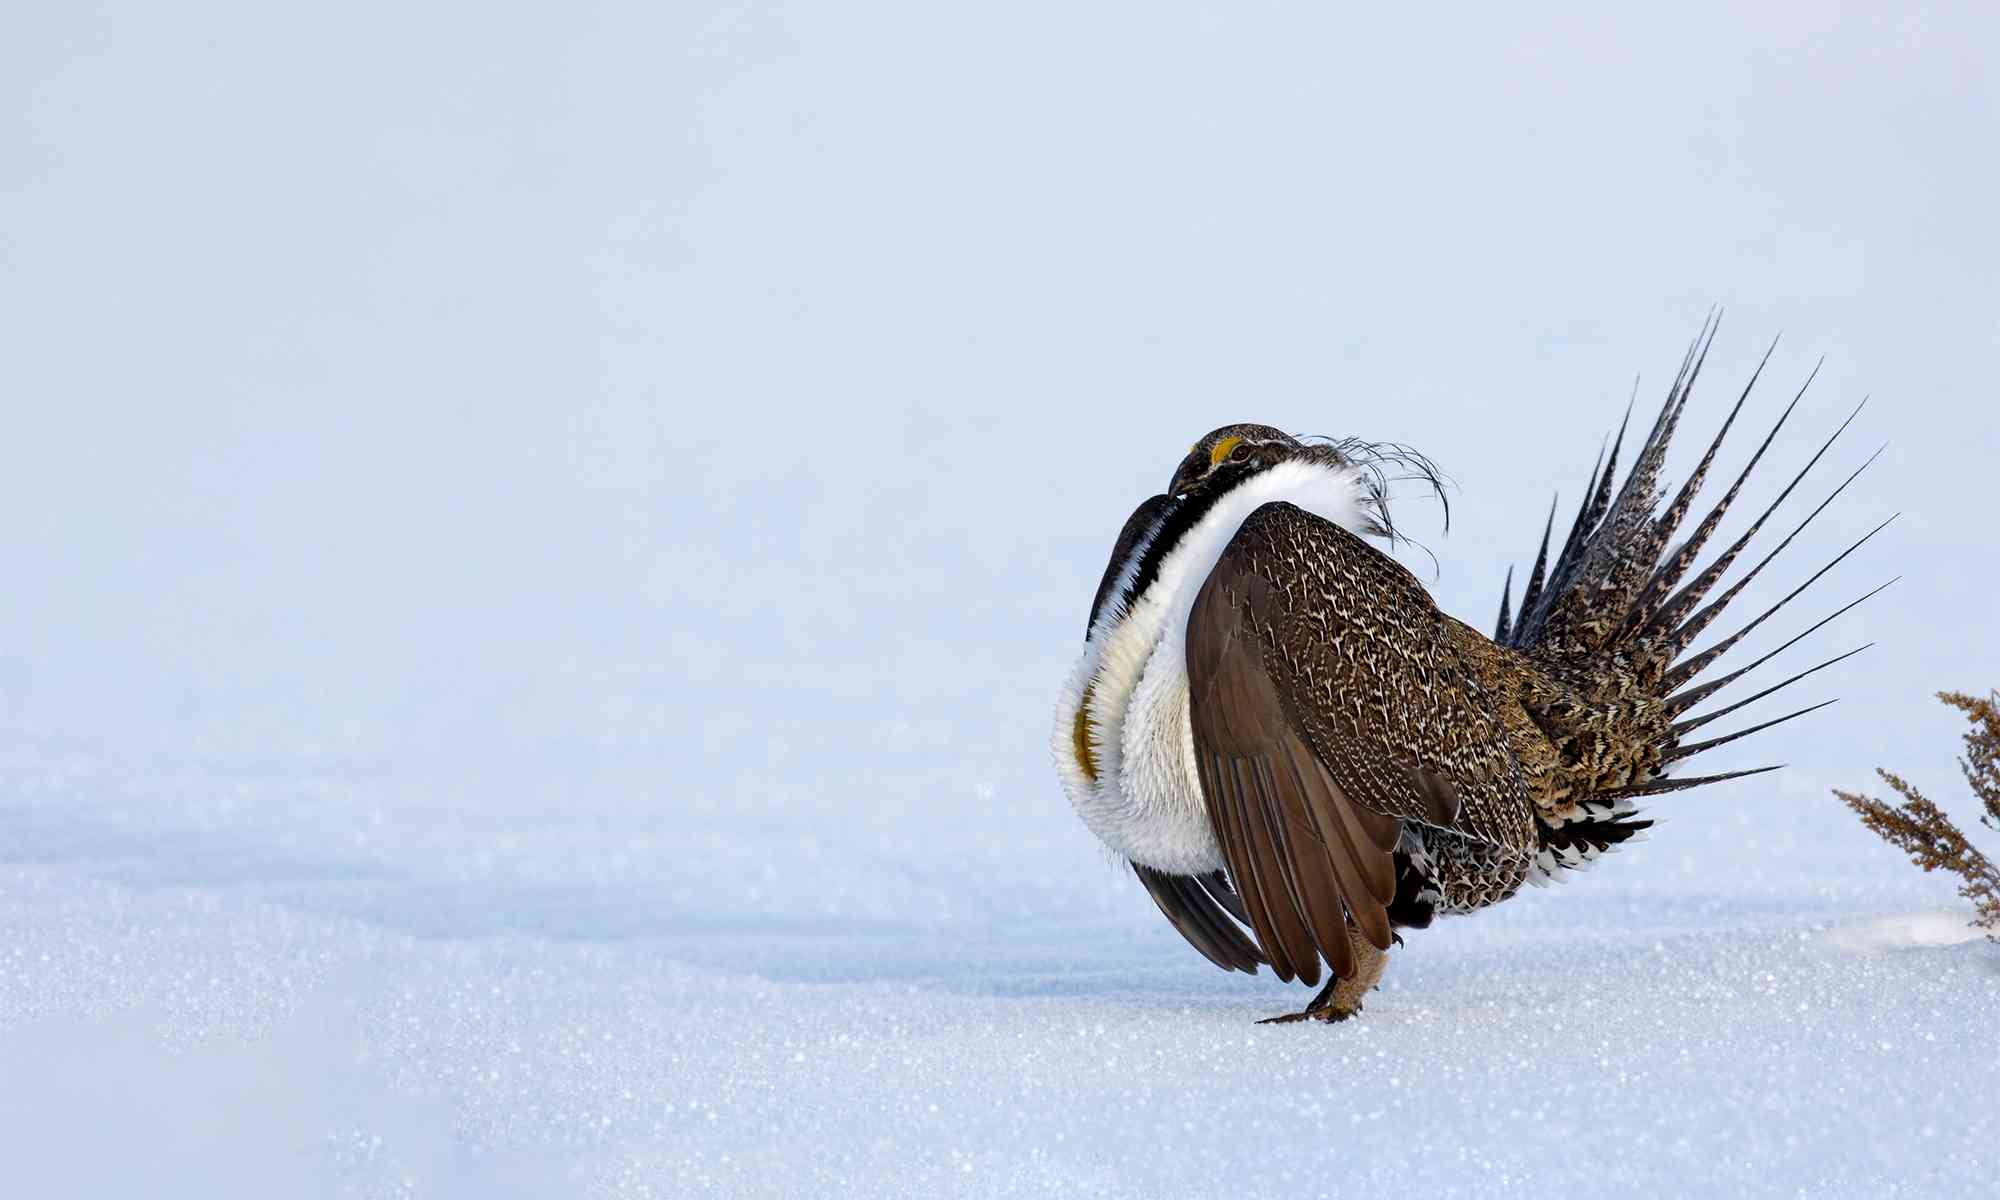 Greater Sage-Grouse in snow